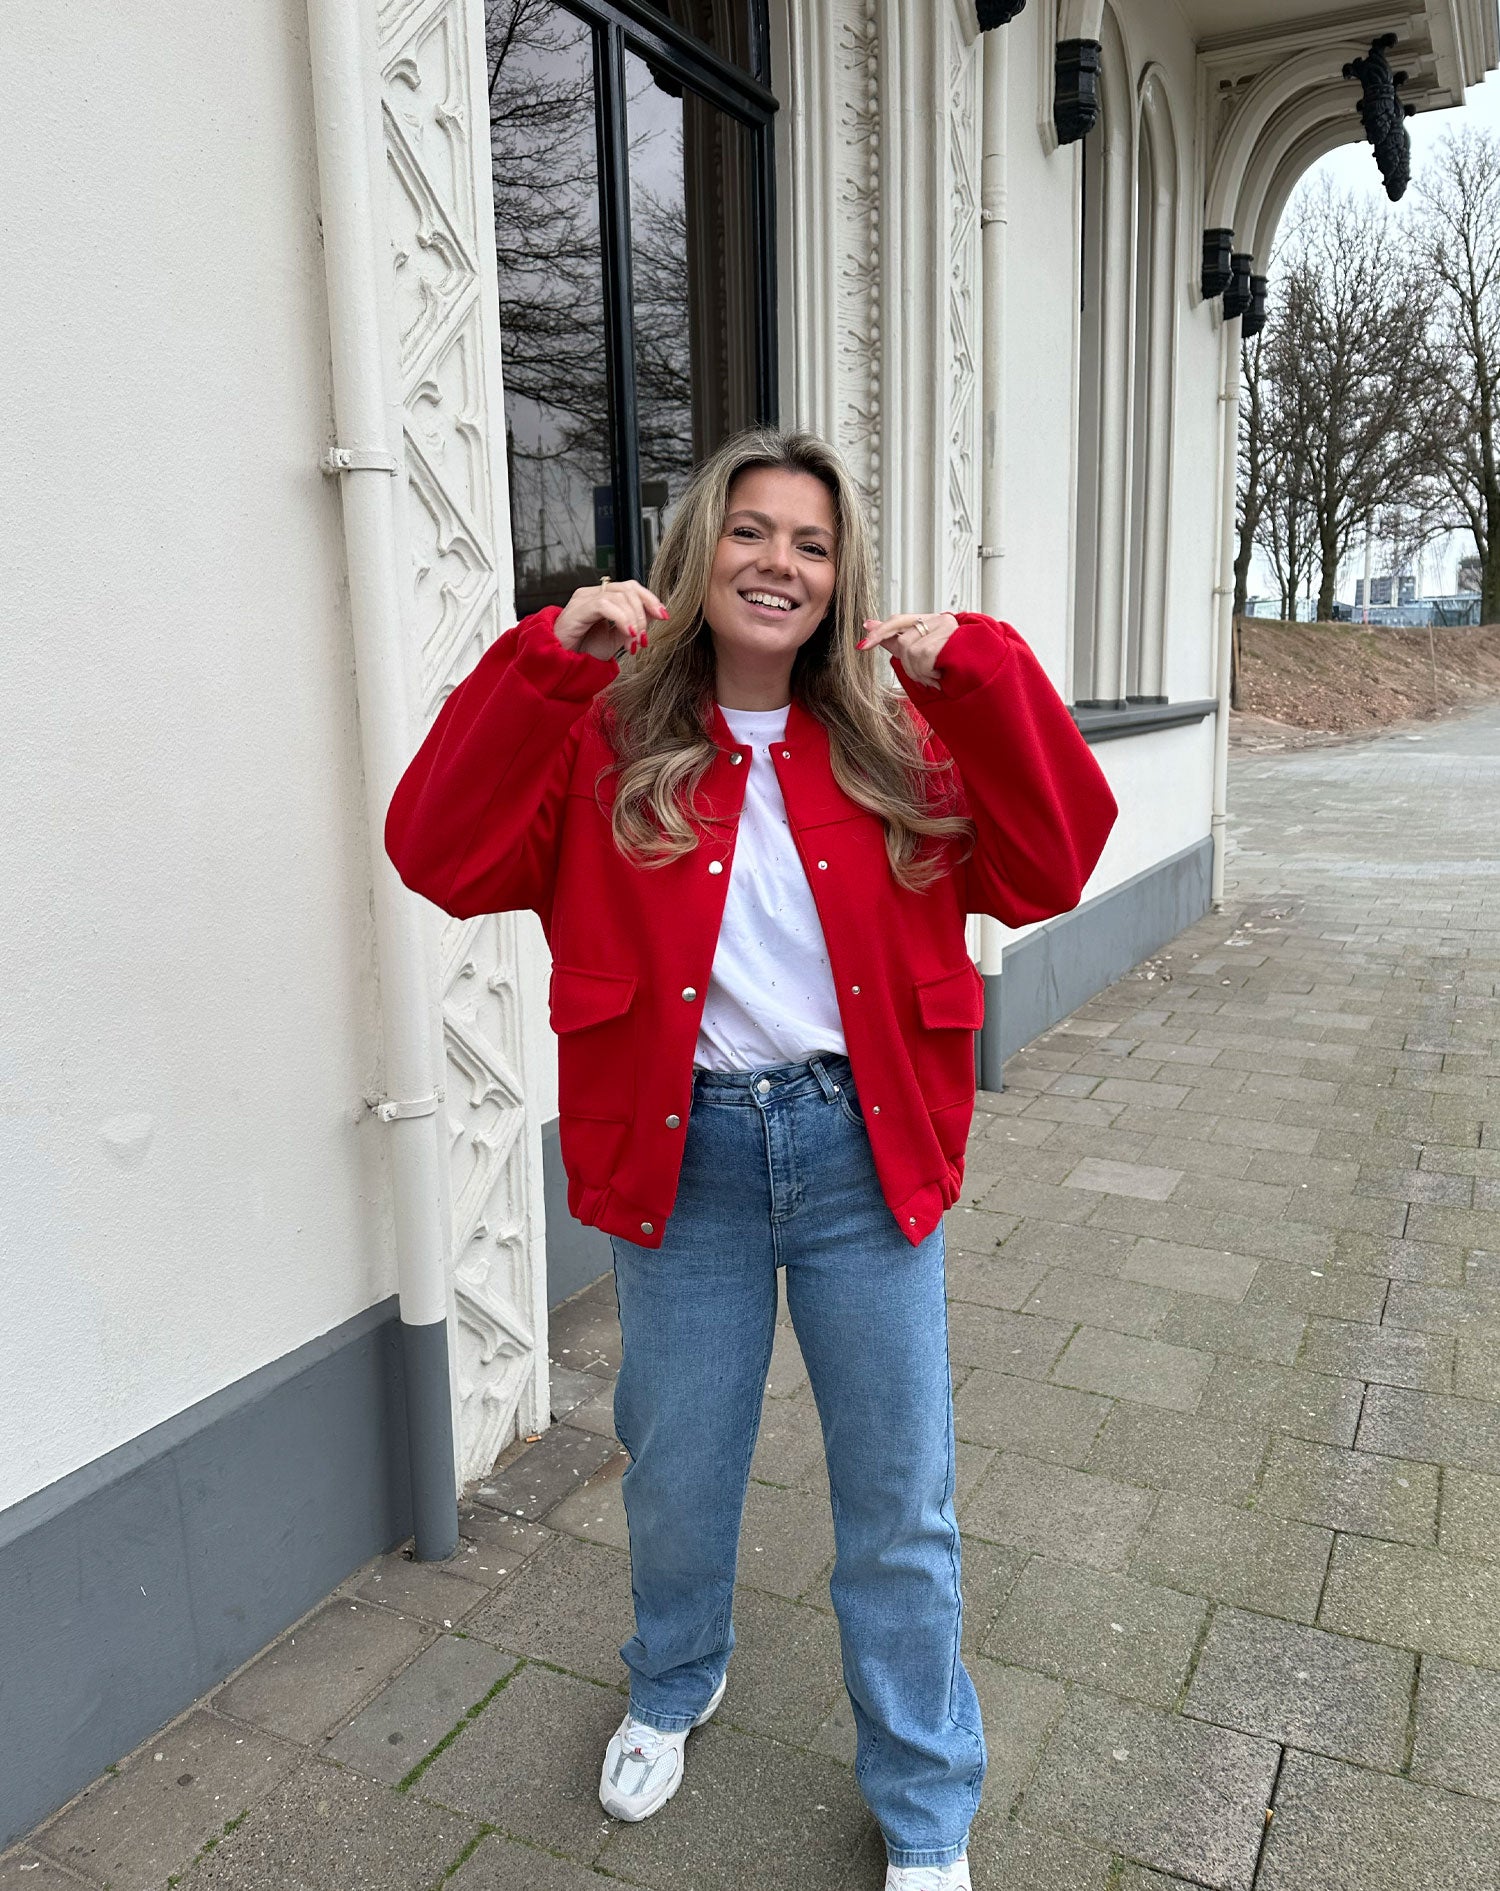 GRACIE BOMBER JACKET RED